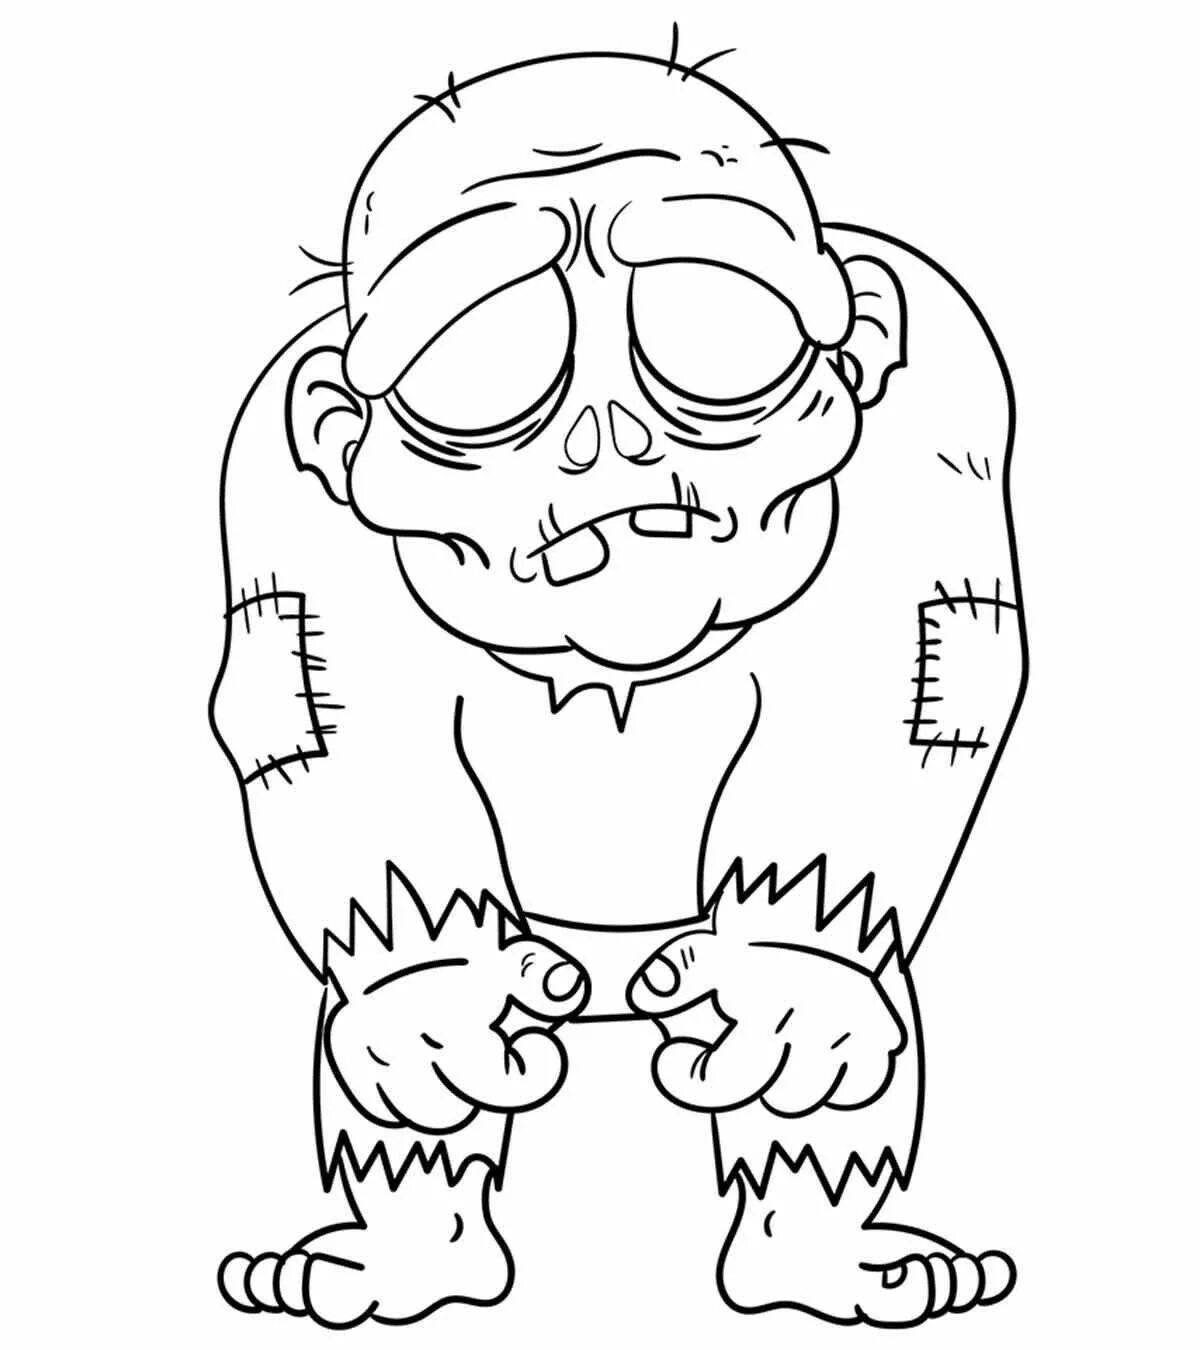 Zombie grotesque coloring book for kids